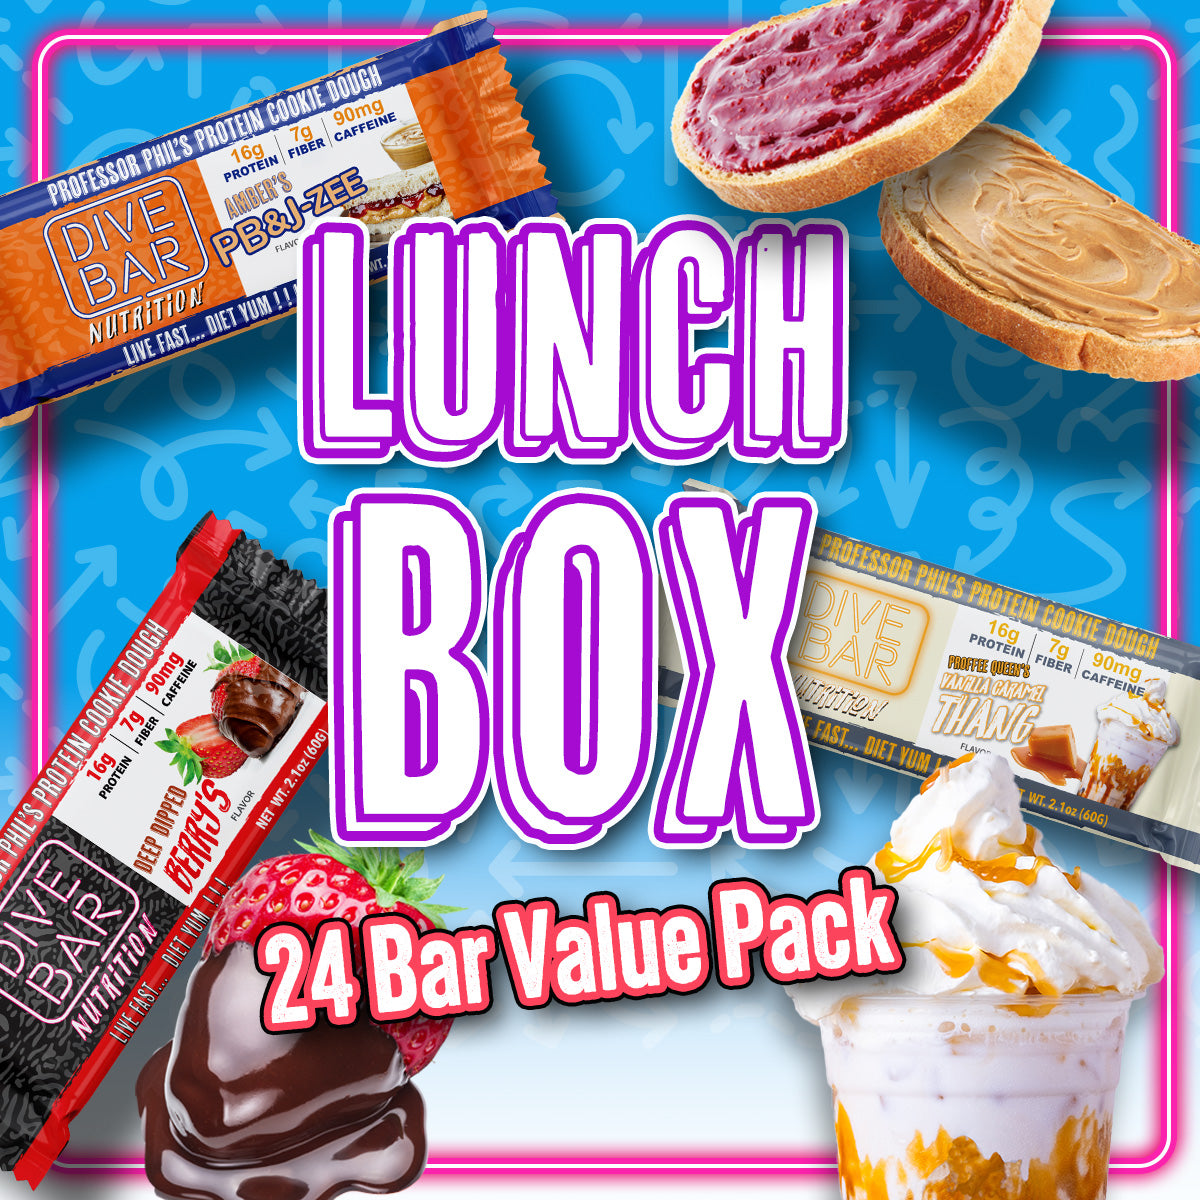 The Lunch Box - 24 Bar Valu Pack !